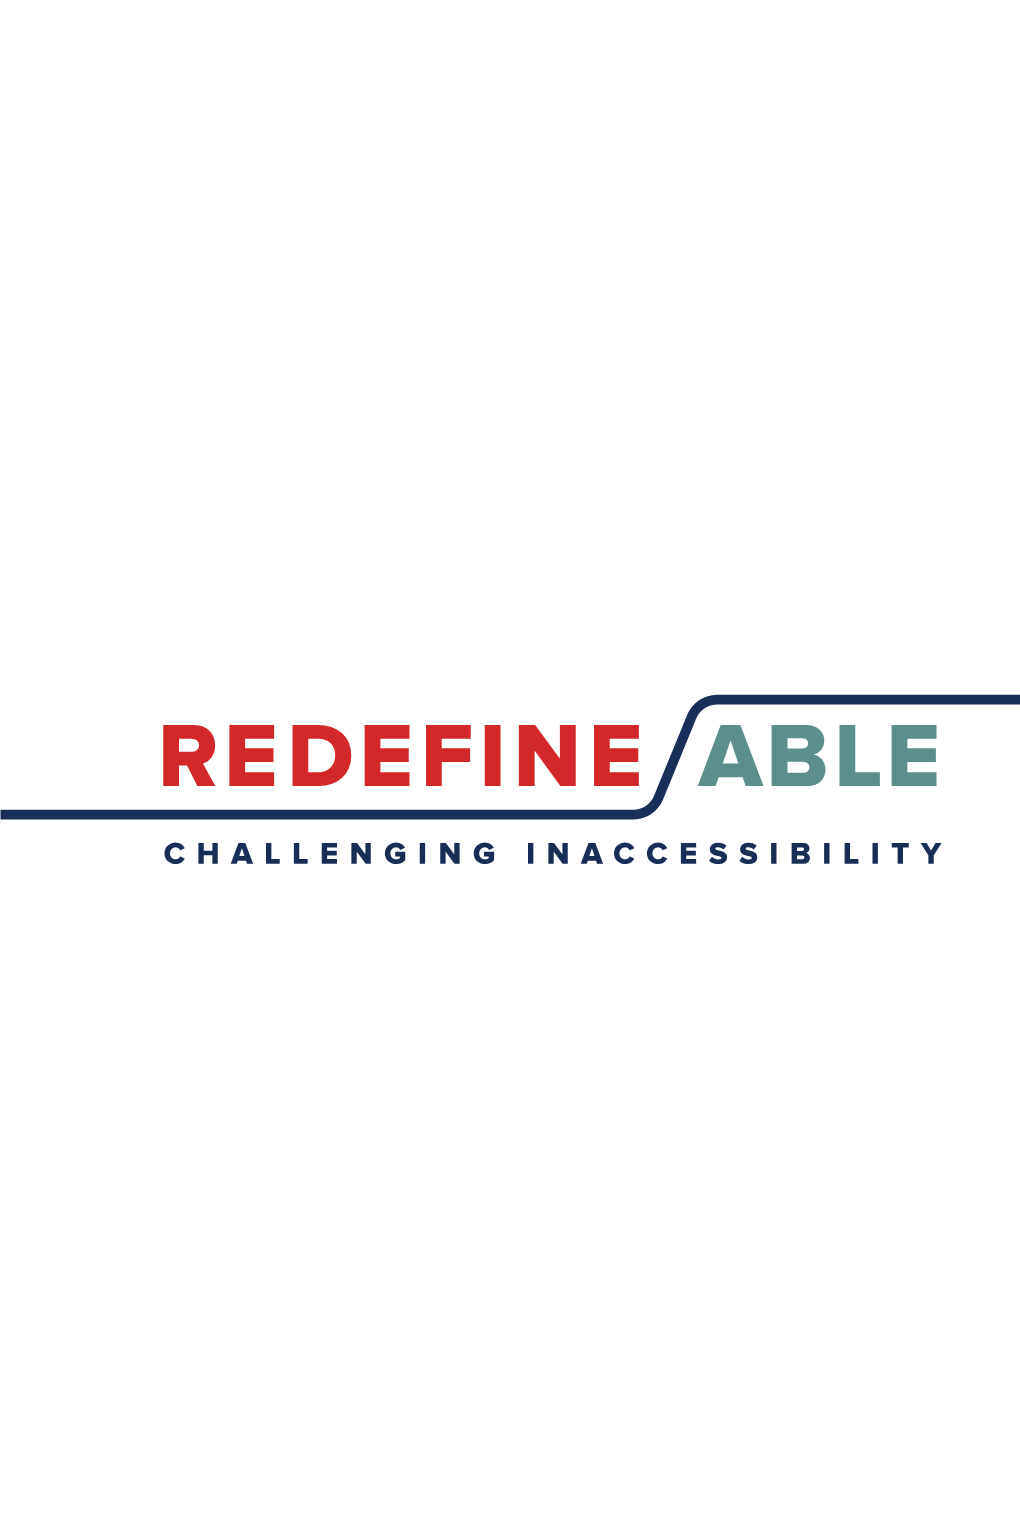 REDEFINE/ABLE: CHALLENGING INACCESSIBILITY the PEALE Our Generous Supporters